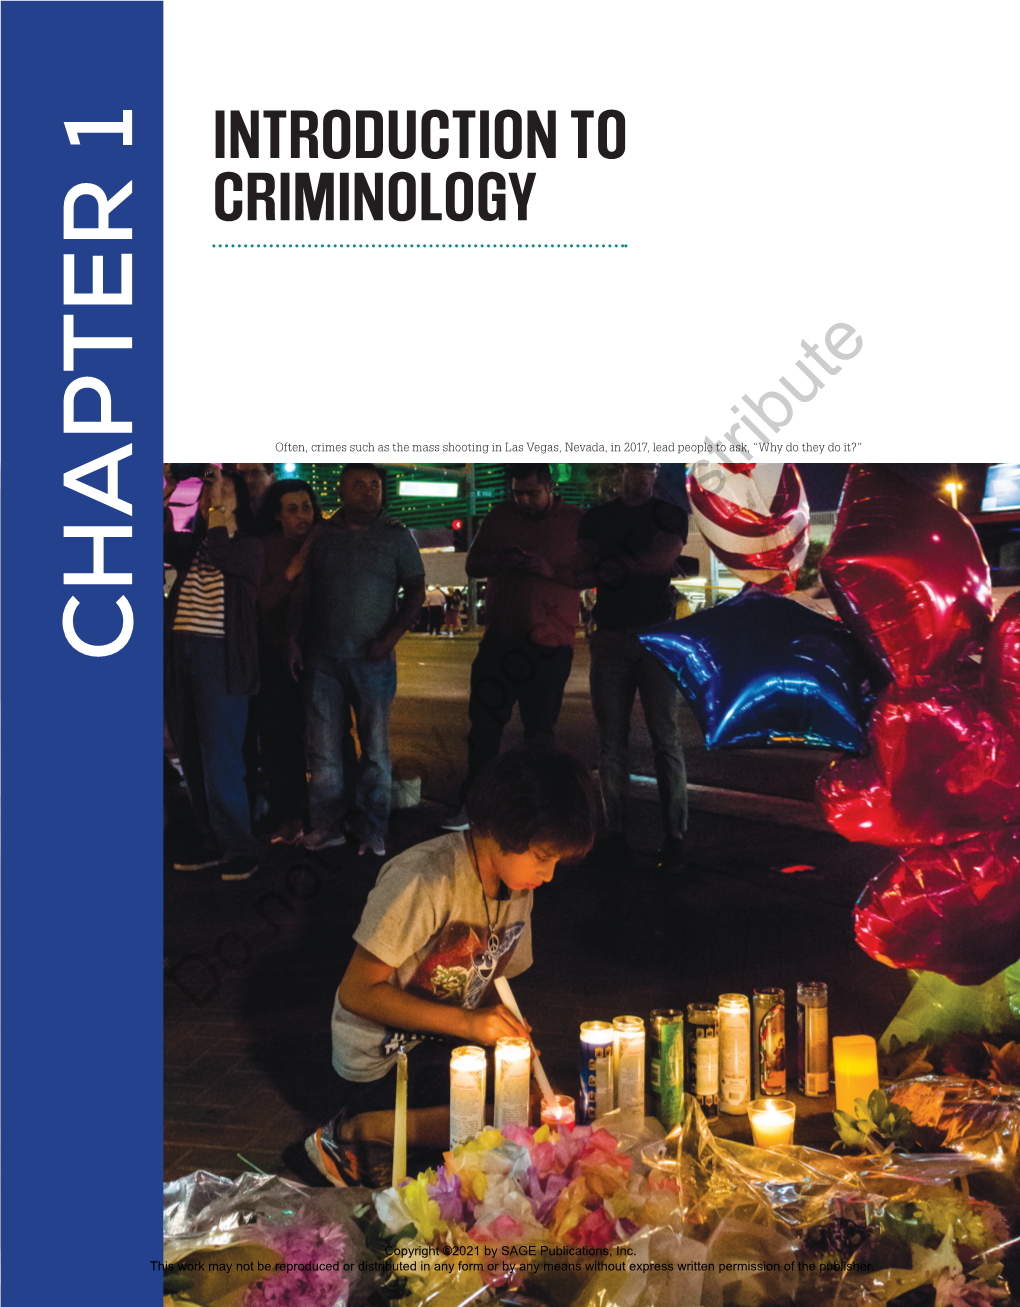 Chapter 1: Introduction to Criminology